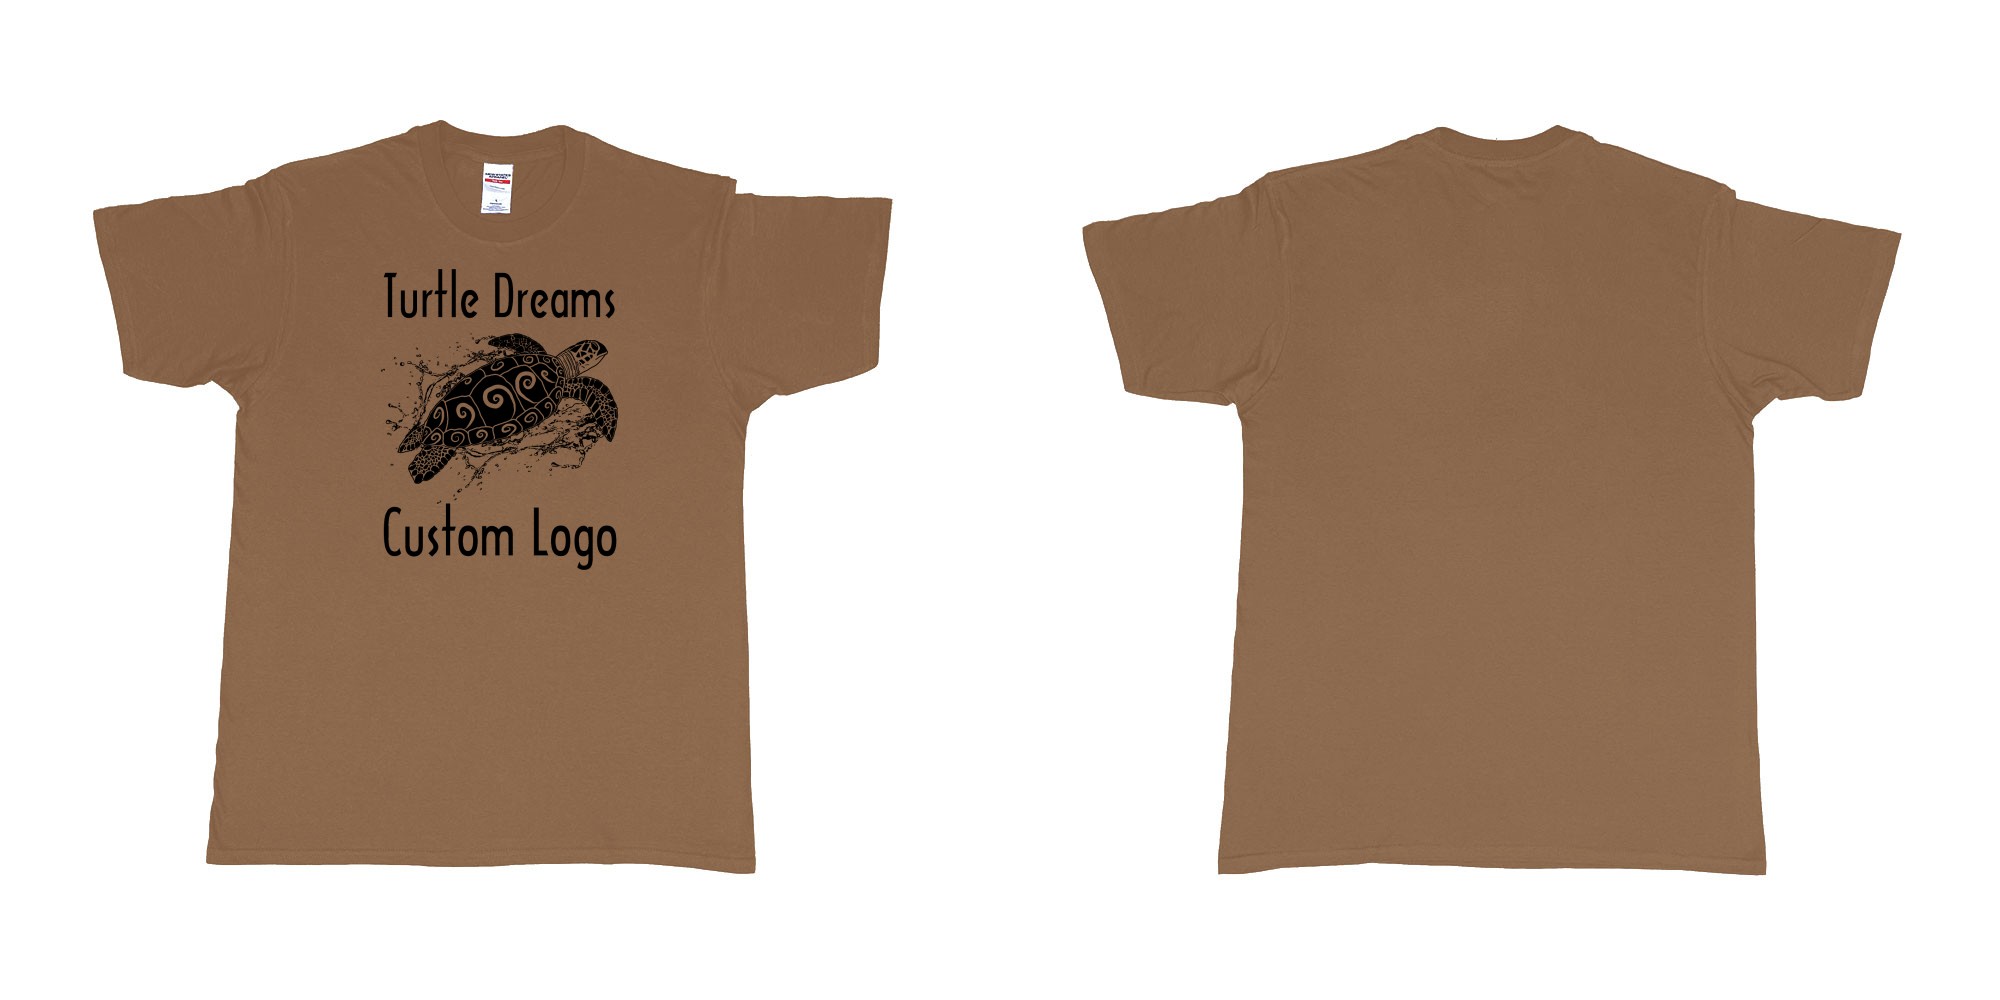 Custom tshirt design turtle dreams custom logo design in fabric color chestnut choice your own text made in Bali by The Pirate Way